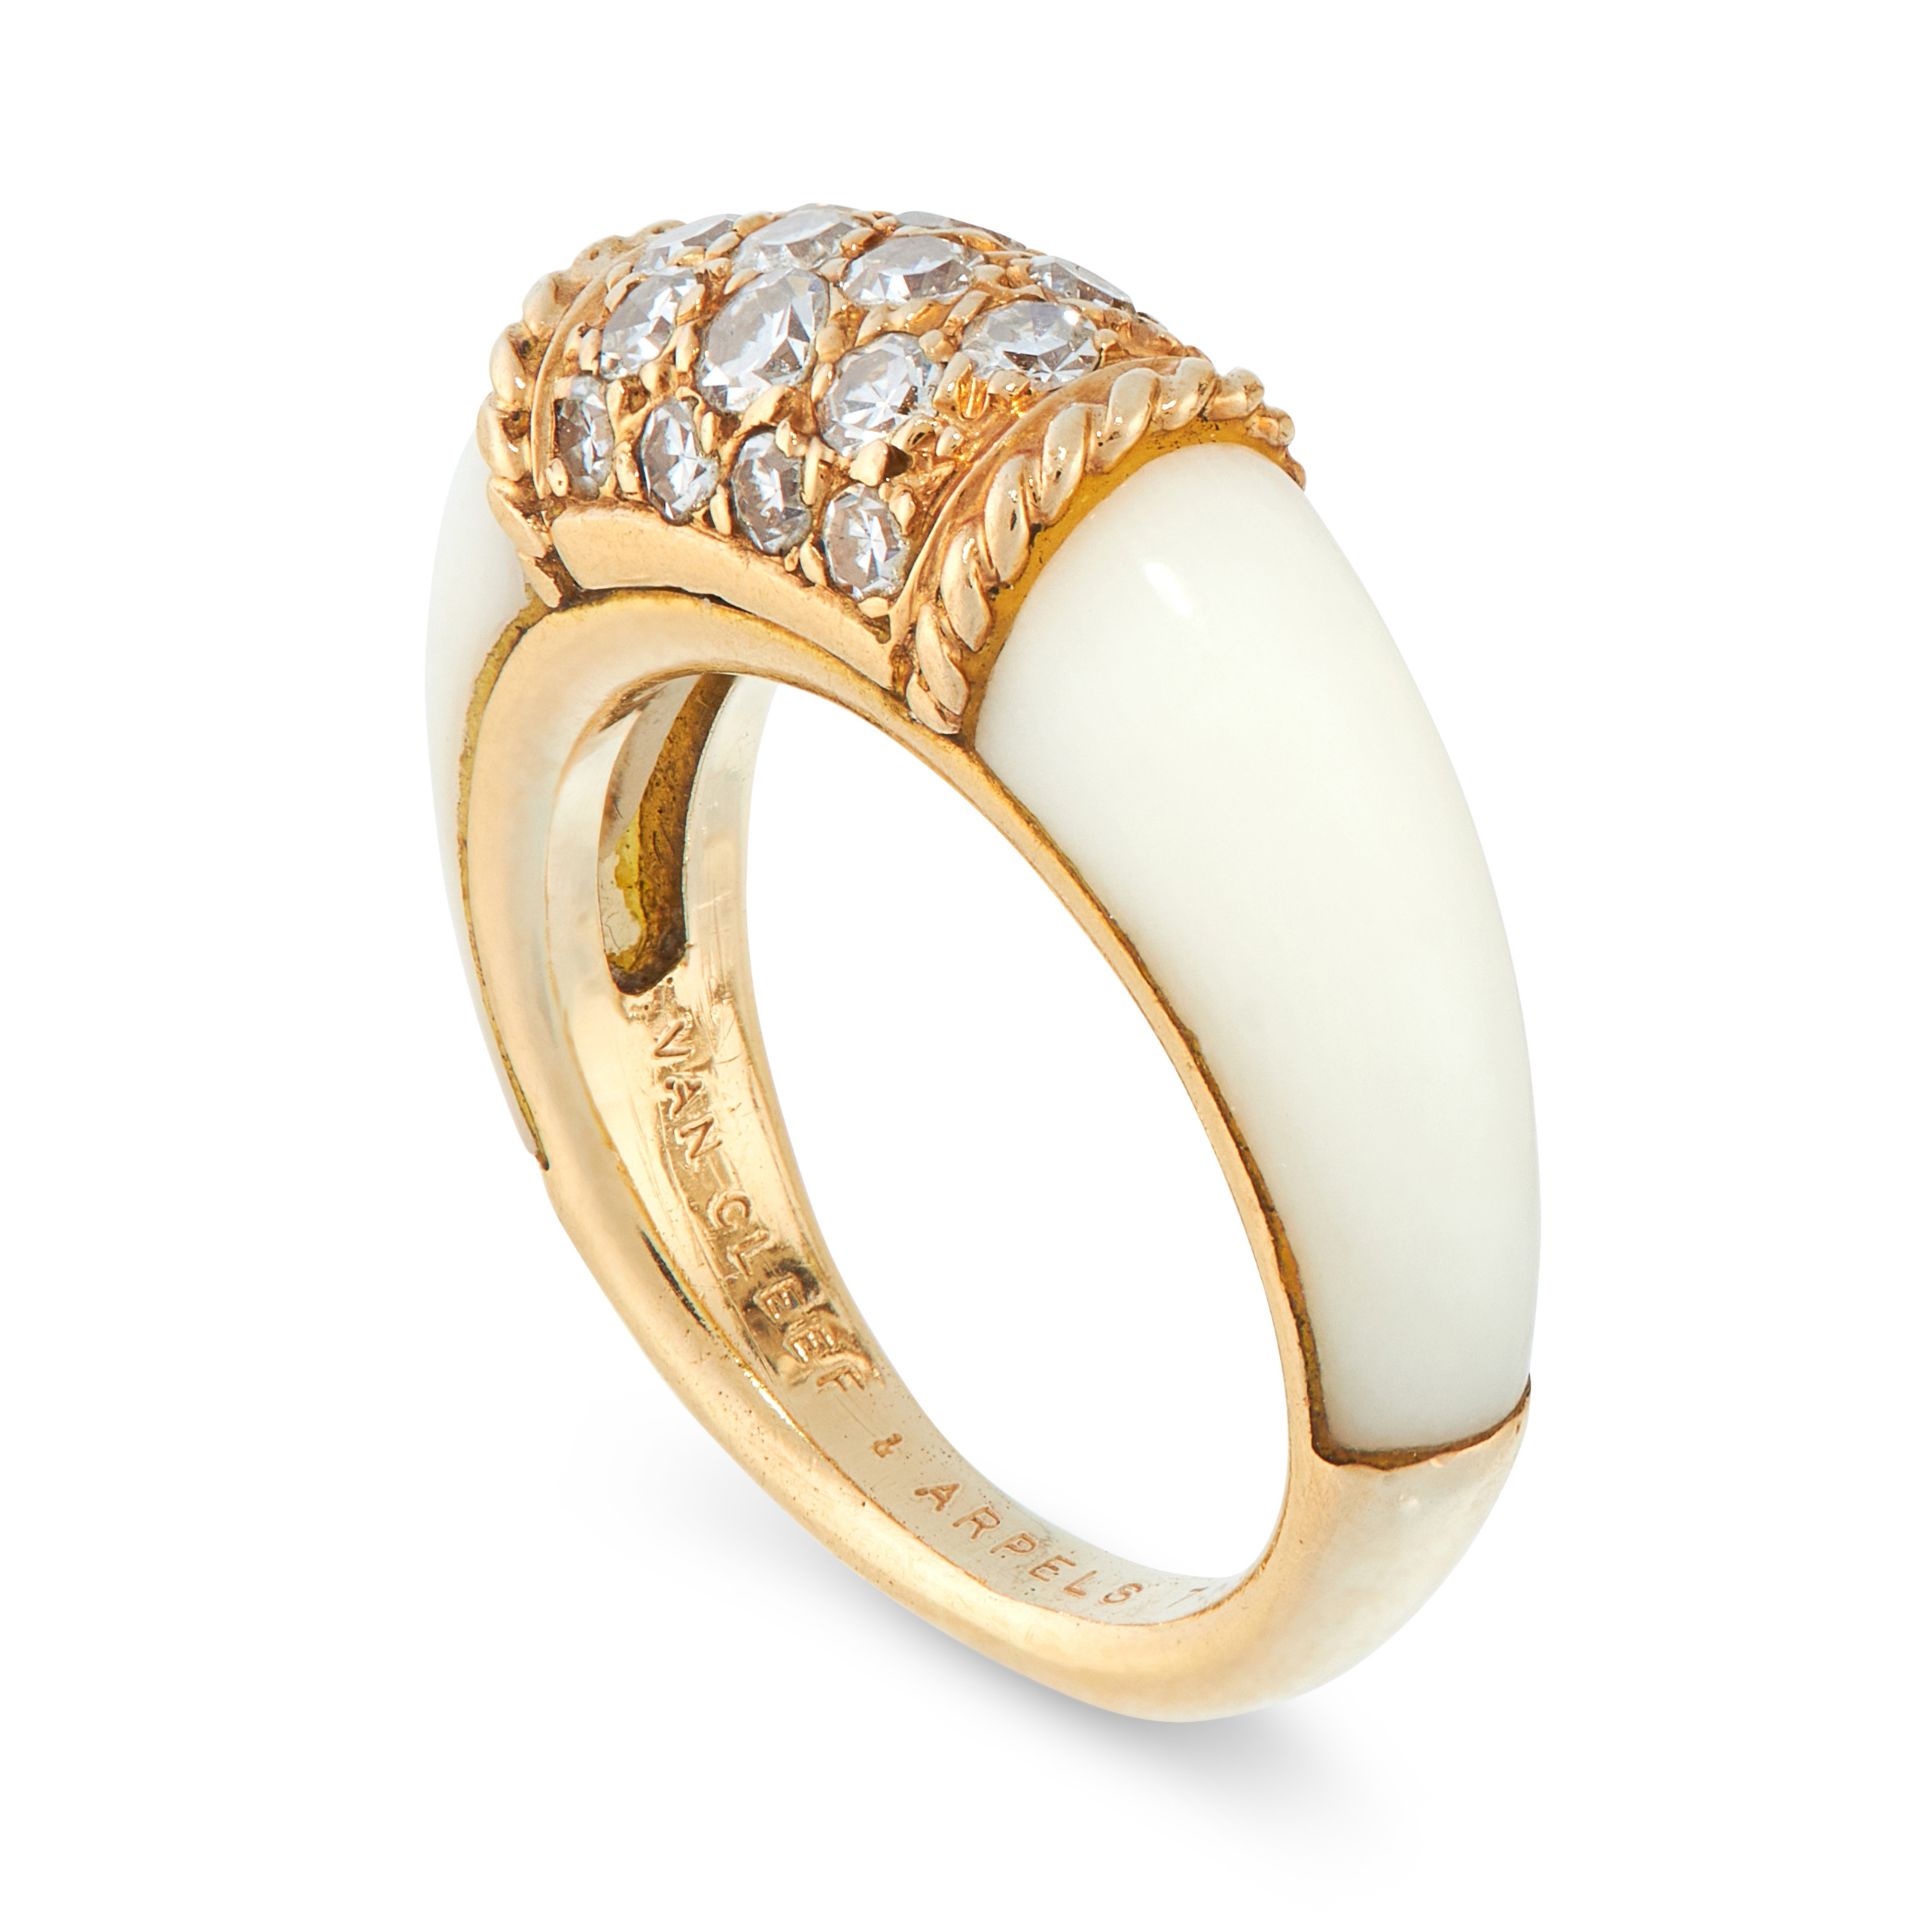 A VINTAGE WHITE CORAL AND DIAMOND PHILIPPINES DRESS RING, VAN CLEEF & ARPELS in 18ct yellow gold, - Image 2 of 2